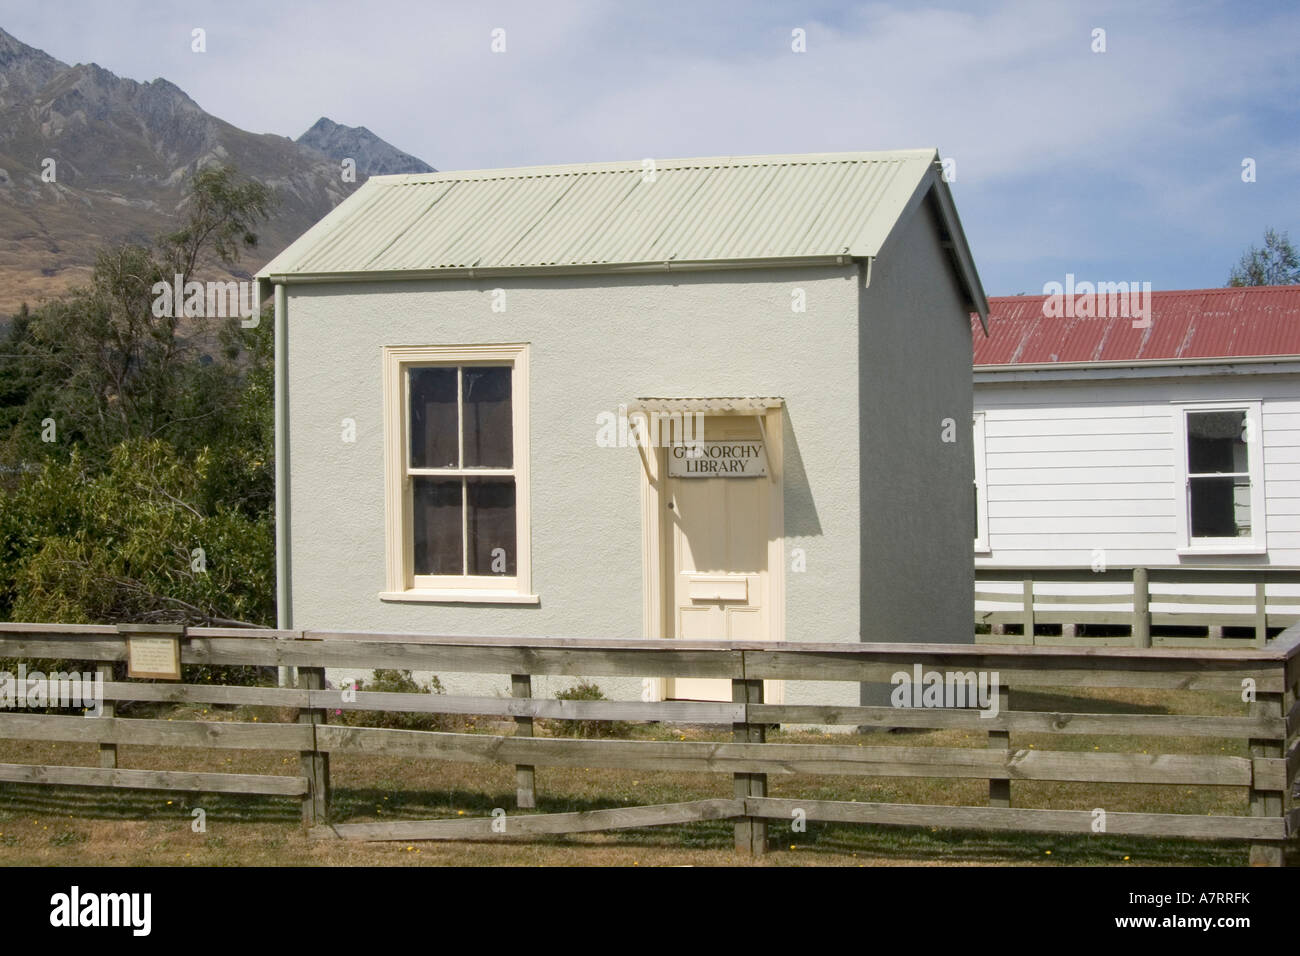 New Zealand, South Island, Glenorchy, quaint disused historical library building Stock Photo